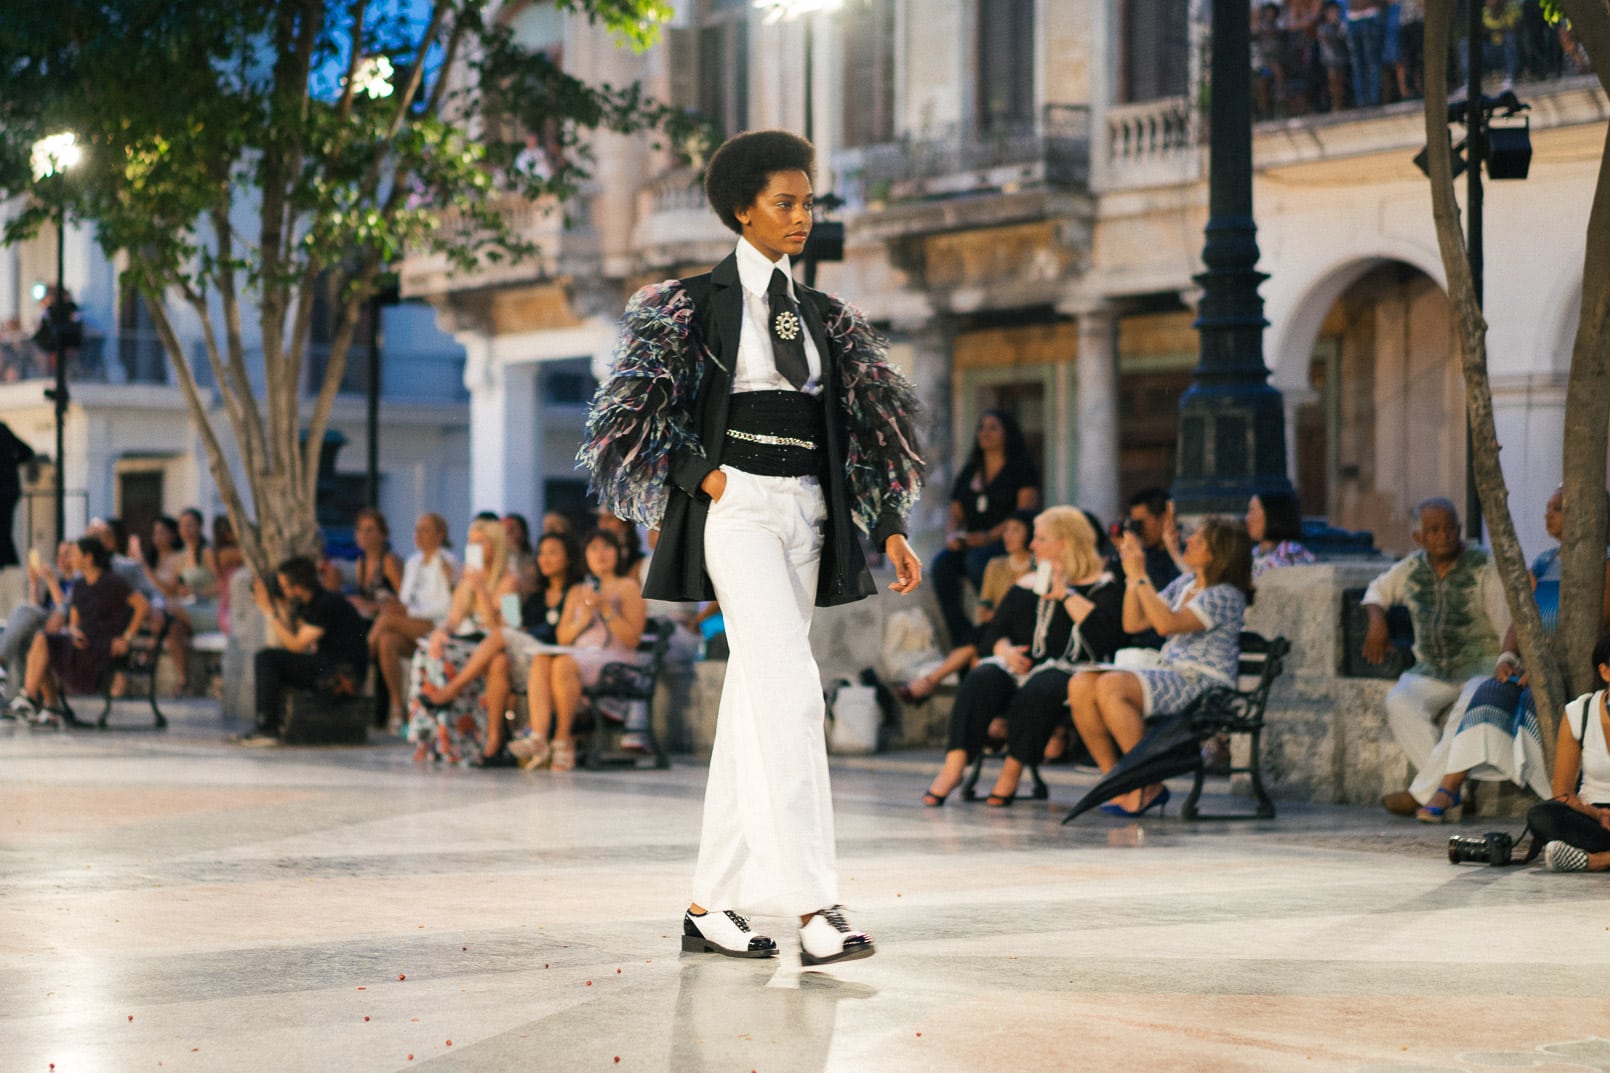 Chanel Cruise Cuba, Pam Hetlinger, The Girl From Panama, Chanel's Cruise Show in Cuba